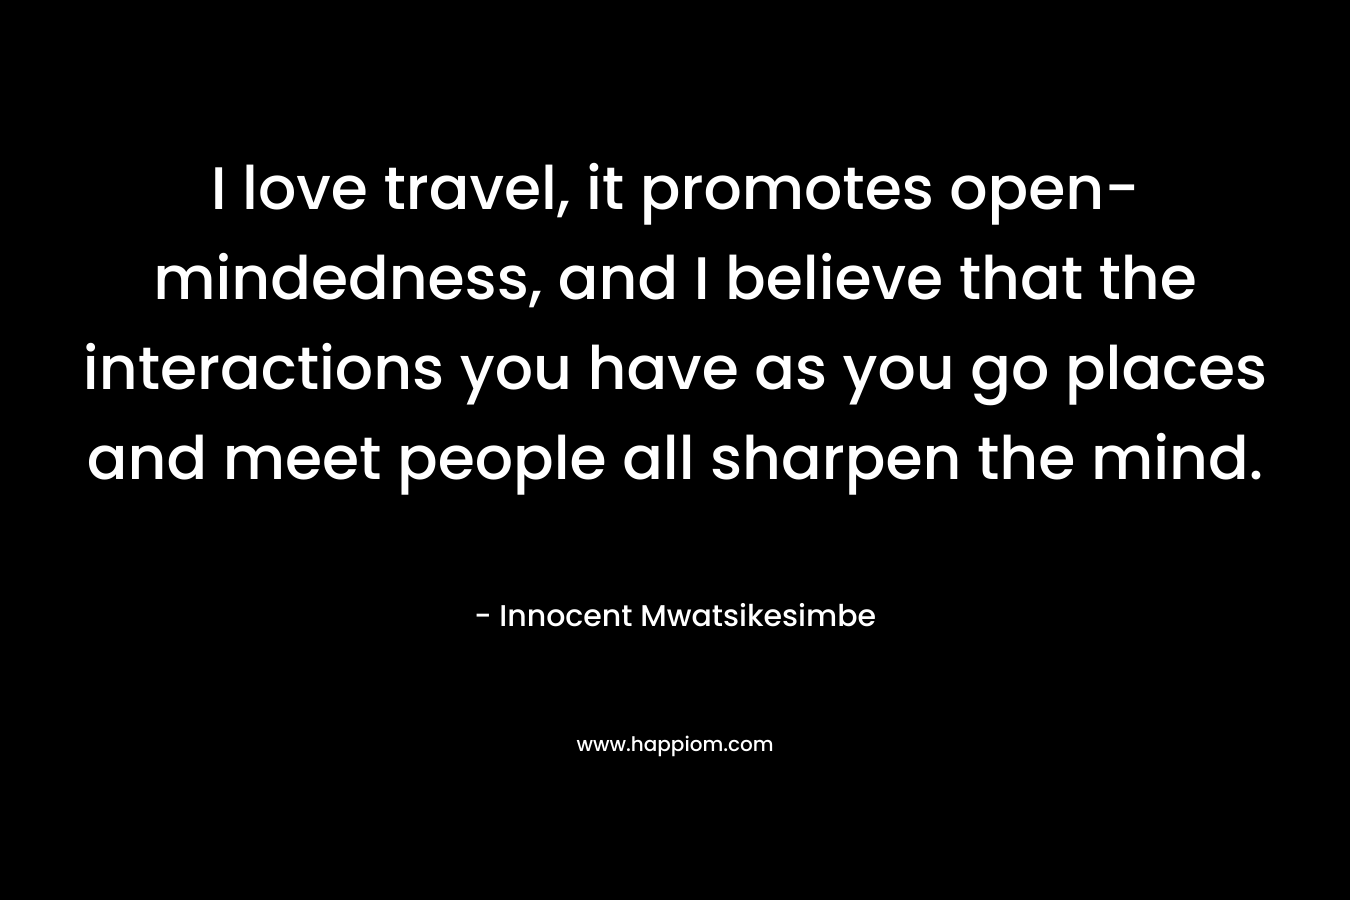 I love travel, it promotes open-mindedness, and I believe that the interactions you have as you go places and meet people all sharpen the mind.